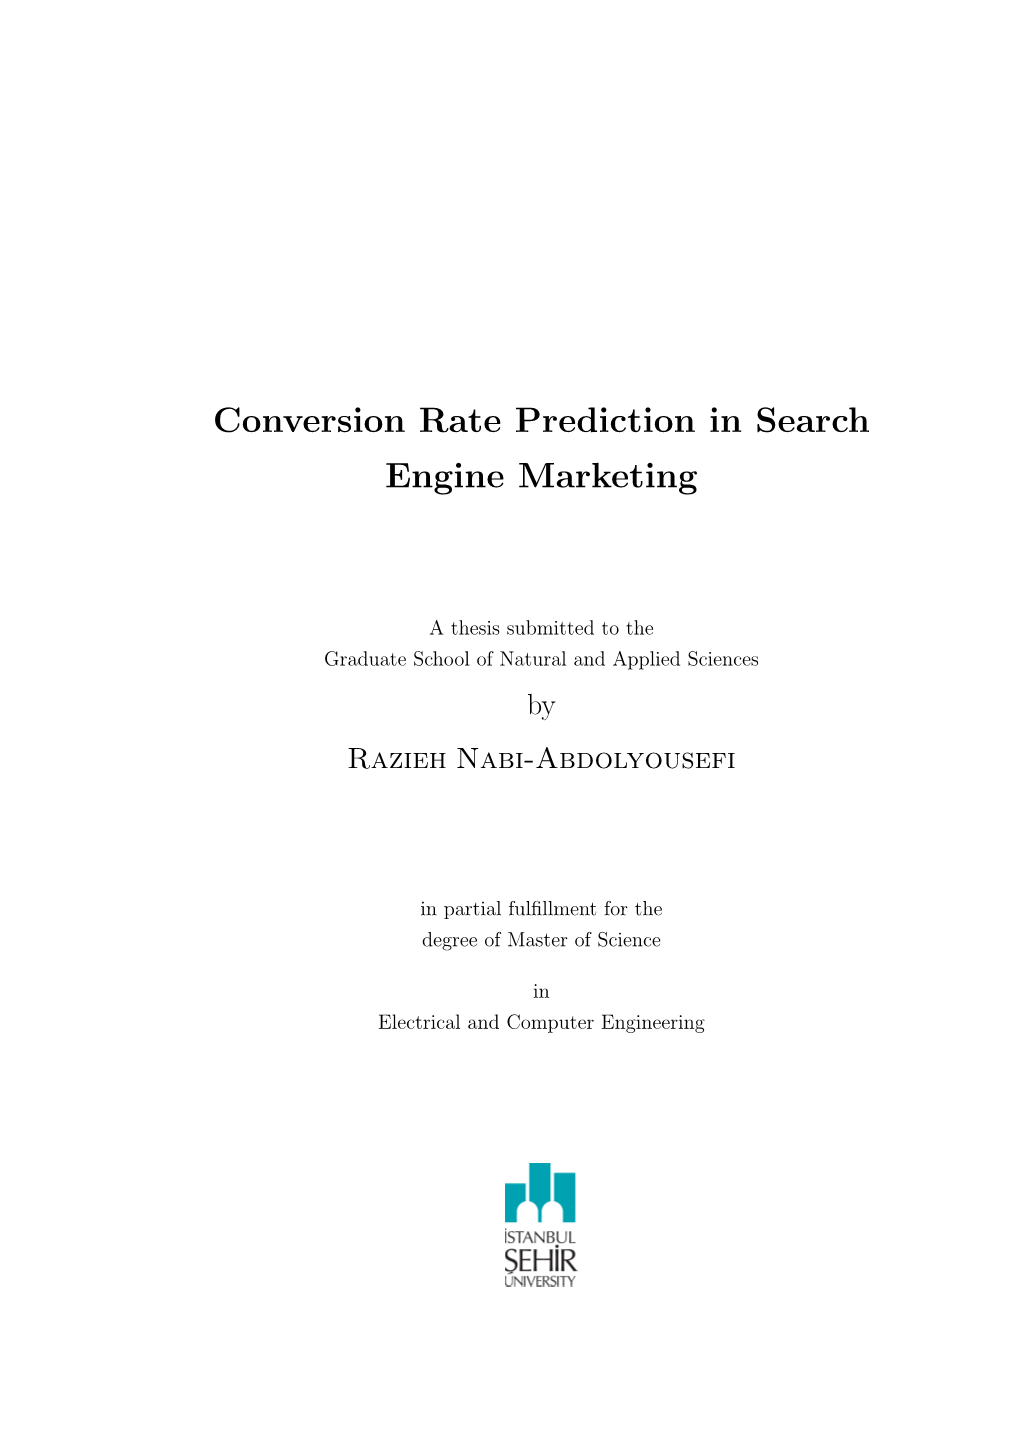 Conversion Rate Prediction in Search Engine Marketing